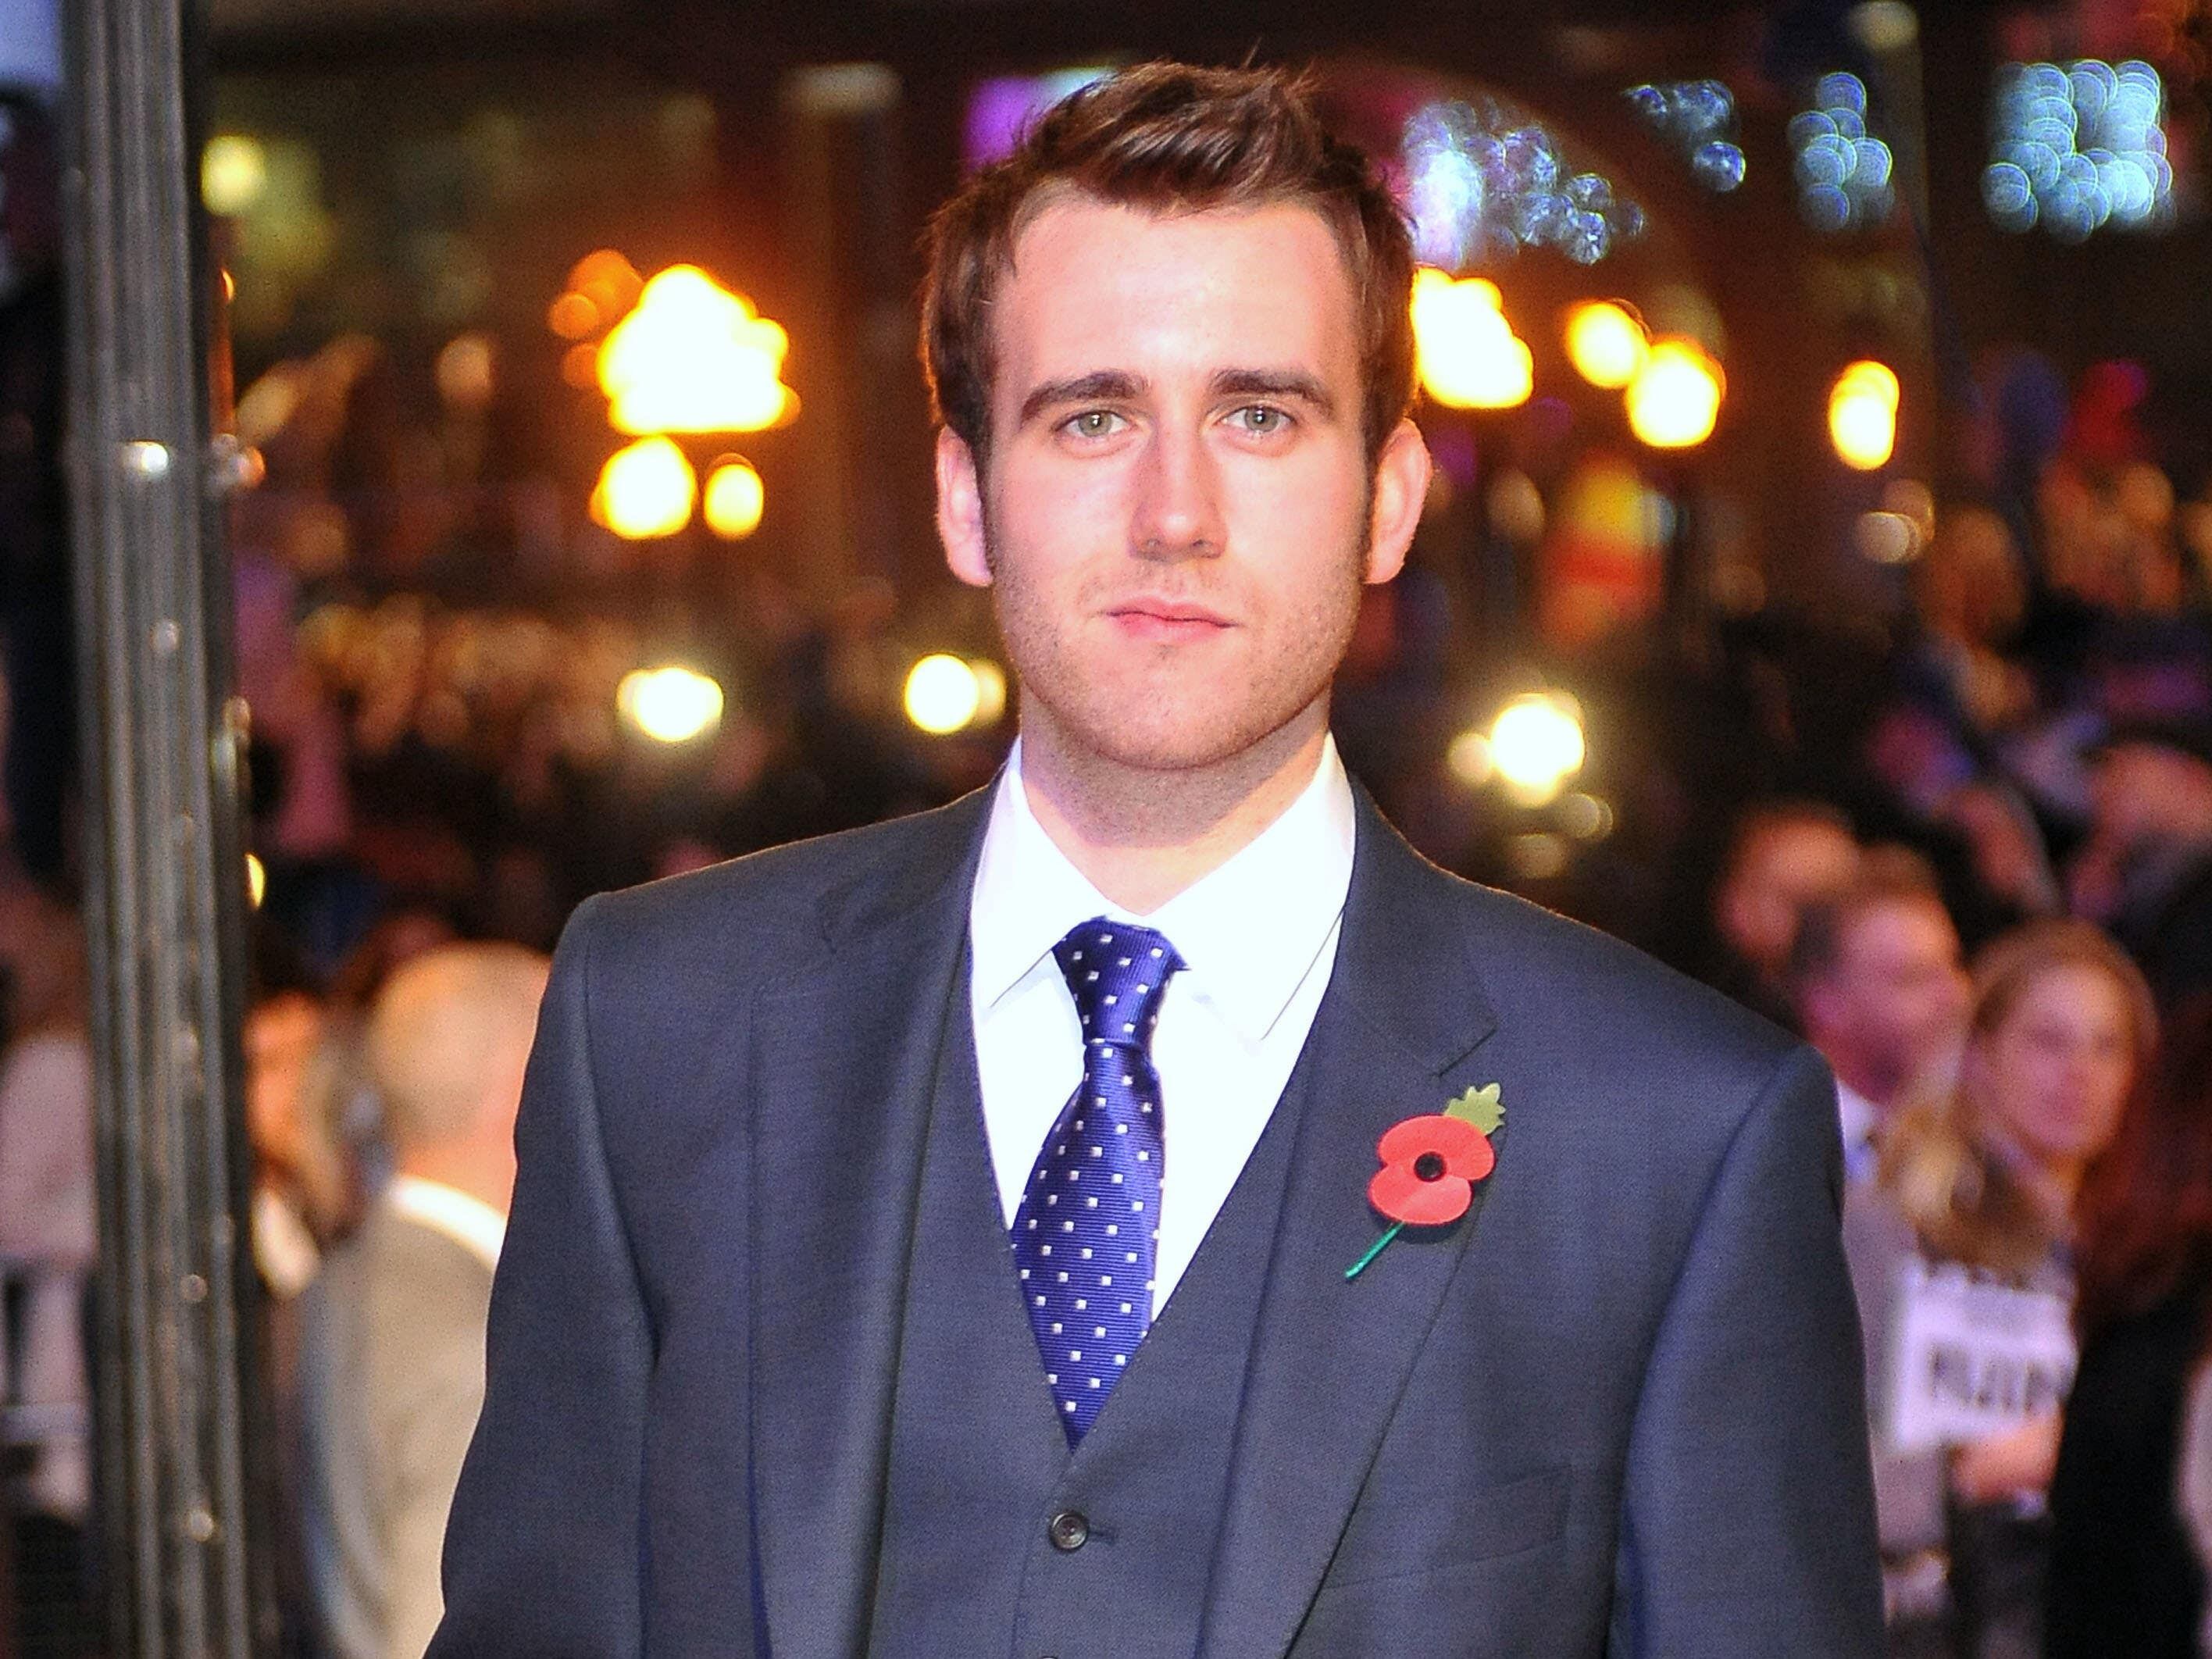 Matthew Lewis encourages men to talk about personal issues ahead of charity walk